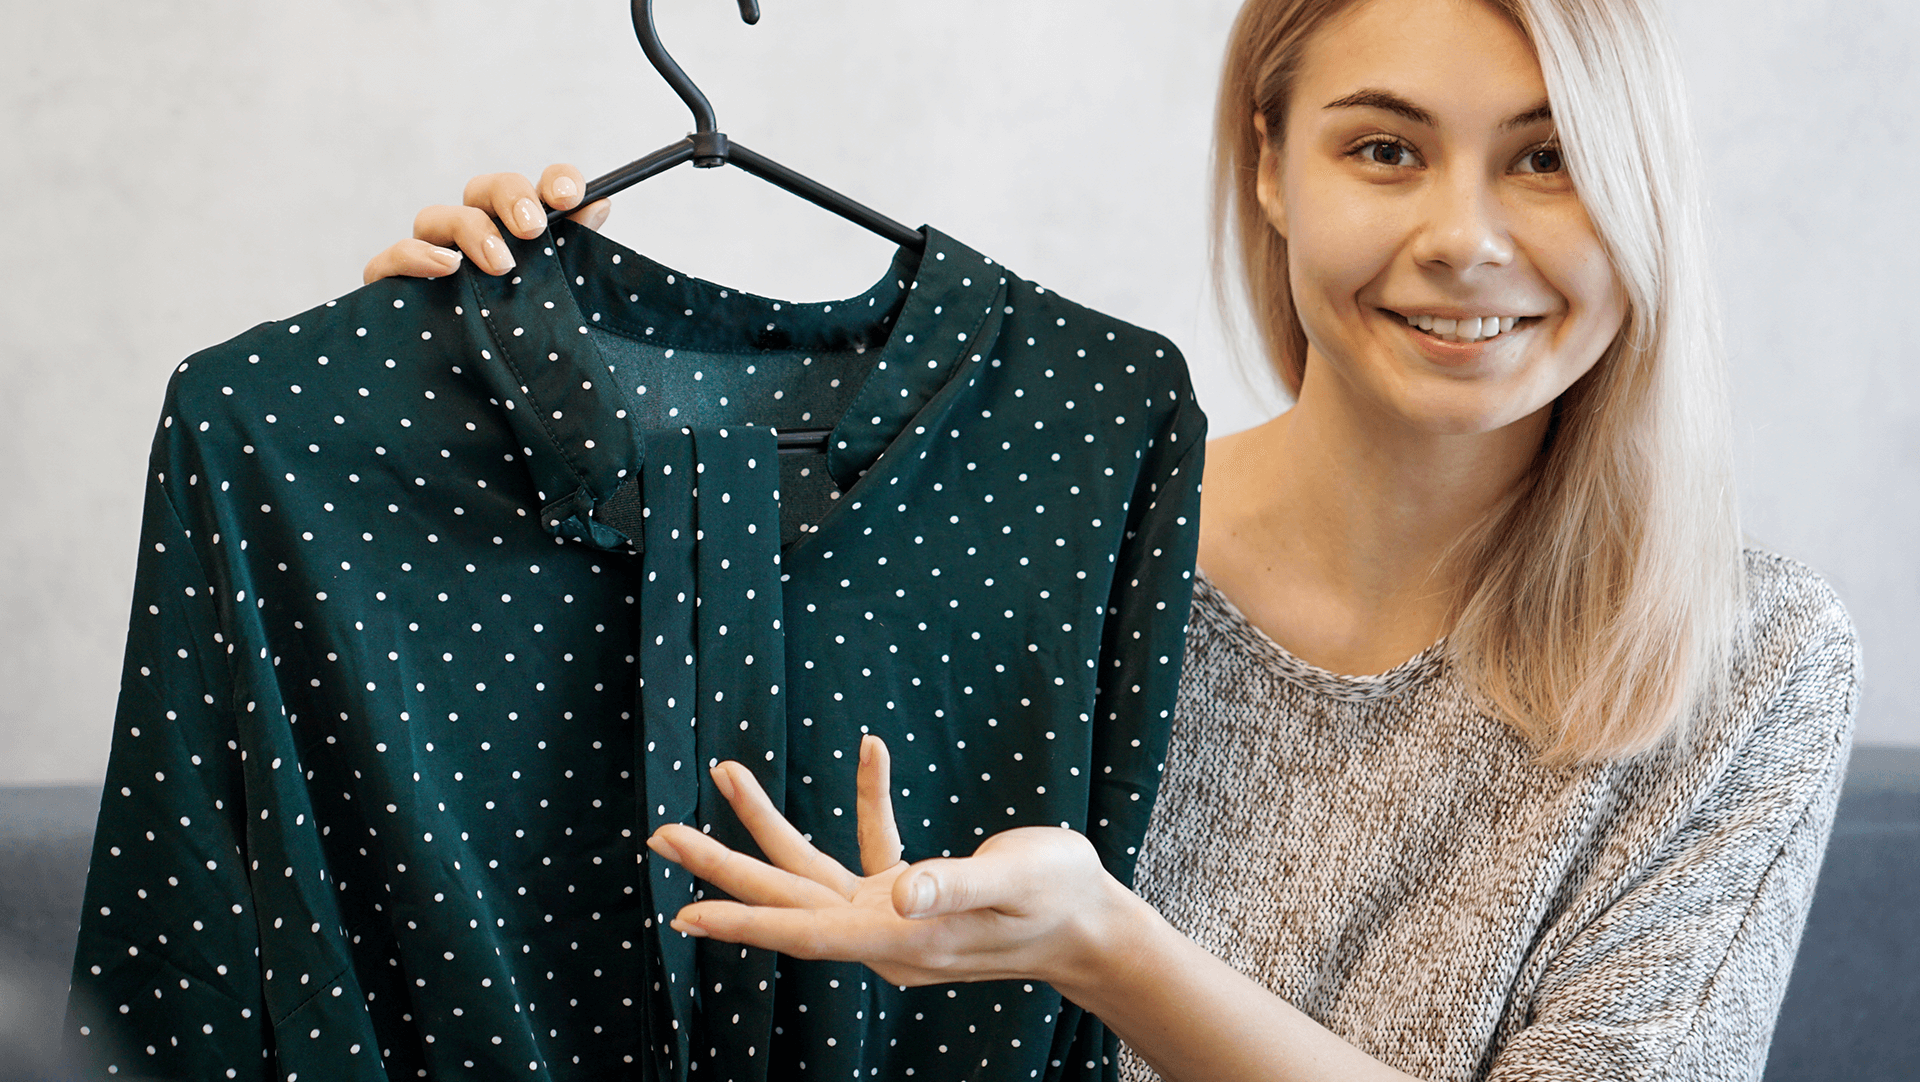 A cheerful young woman showcasing a polka-dotted green blouse on a hanger.